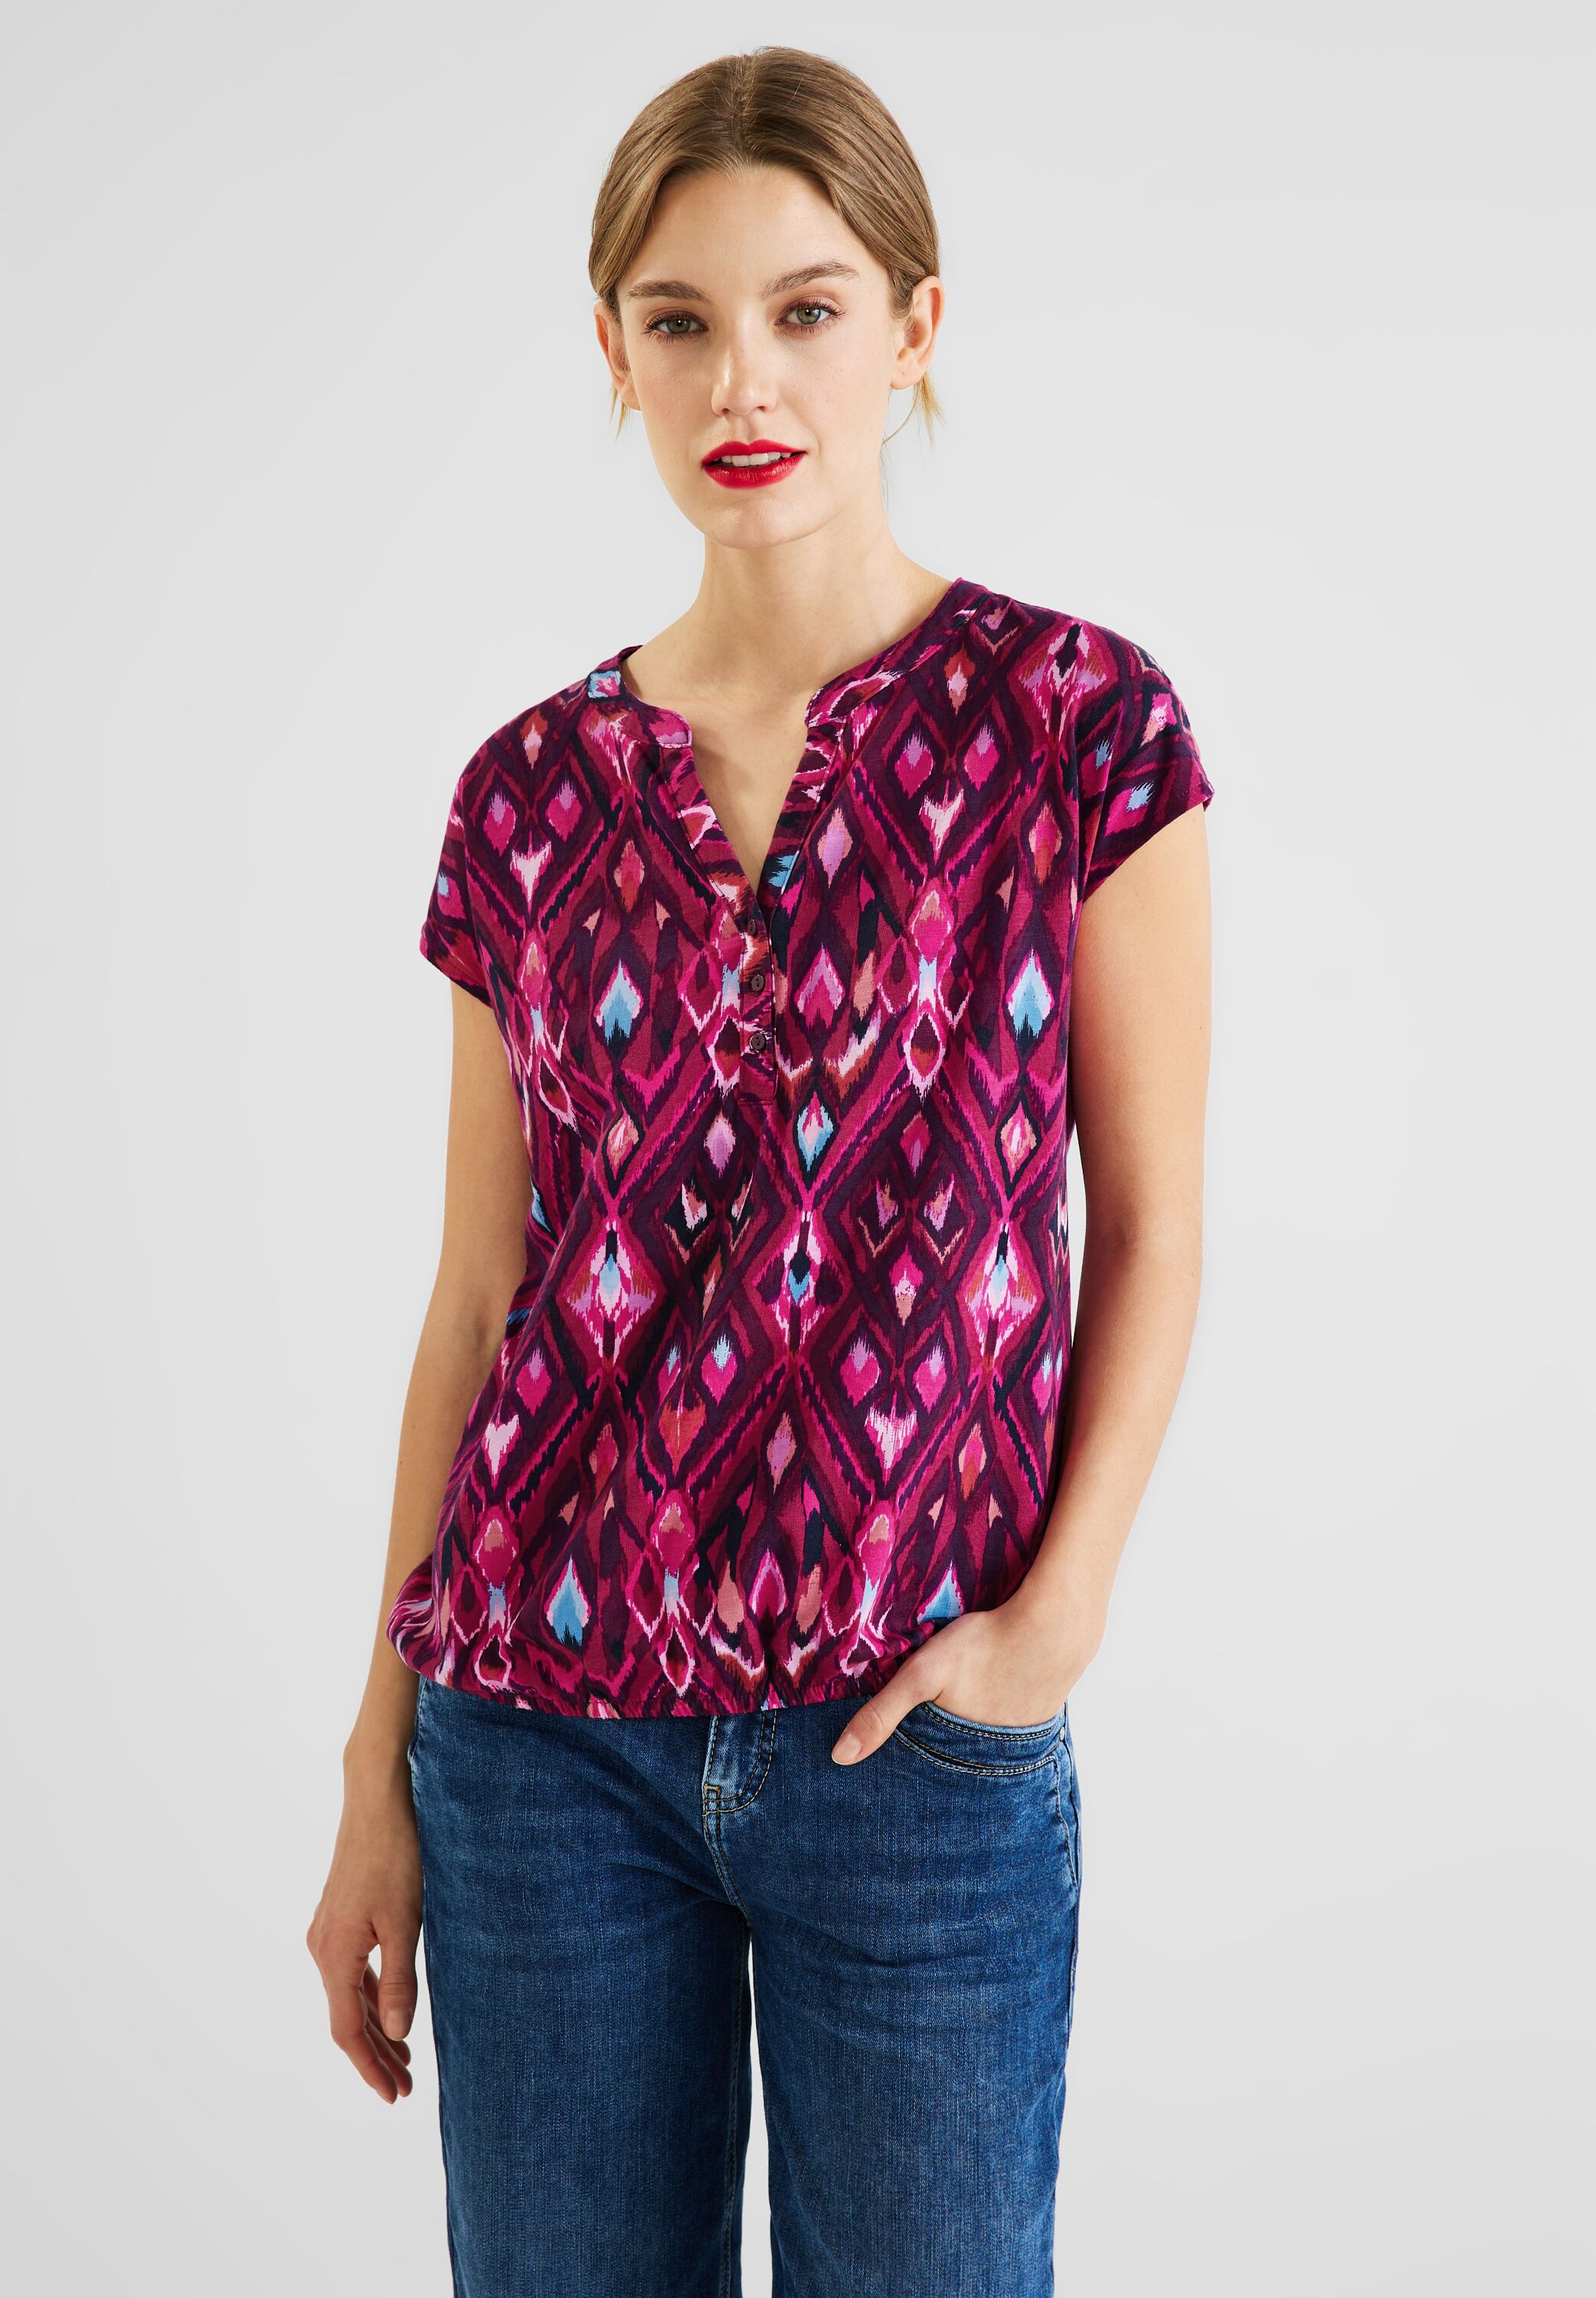 Street One T-Shirt in Tamed Berry im SALE reduziert A319605-34886 - CONCEPT  Mode